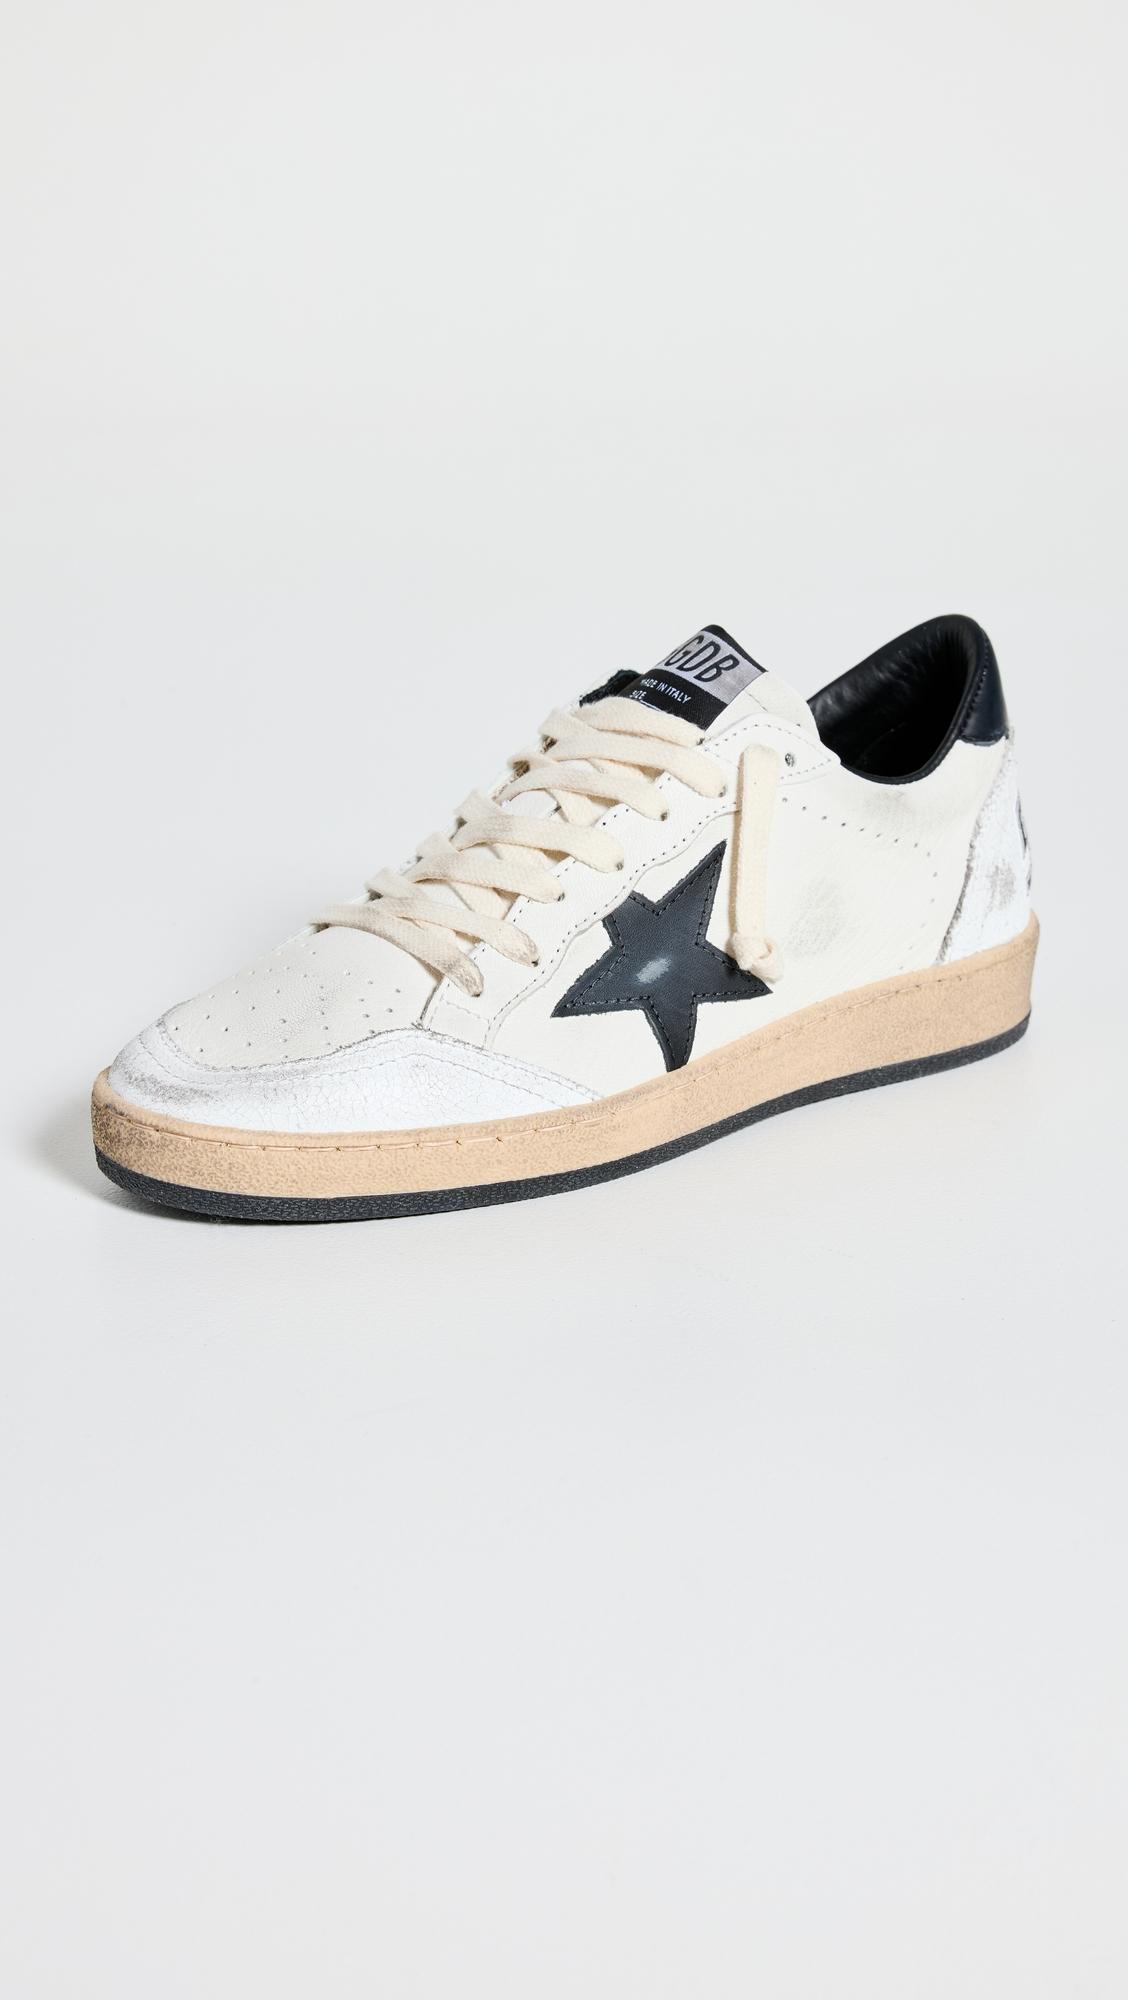 Golden Goose Ball Star Star And Heel Crack Toe Sneakers in White | Lyst